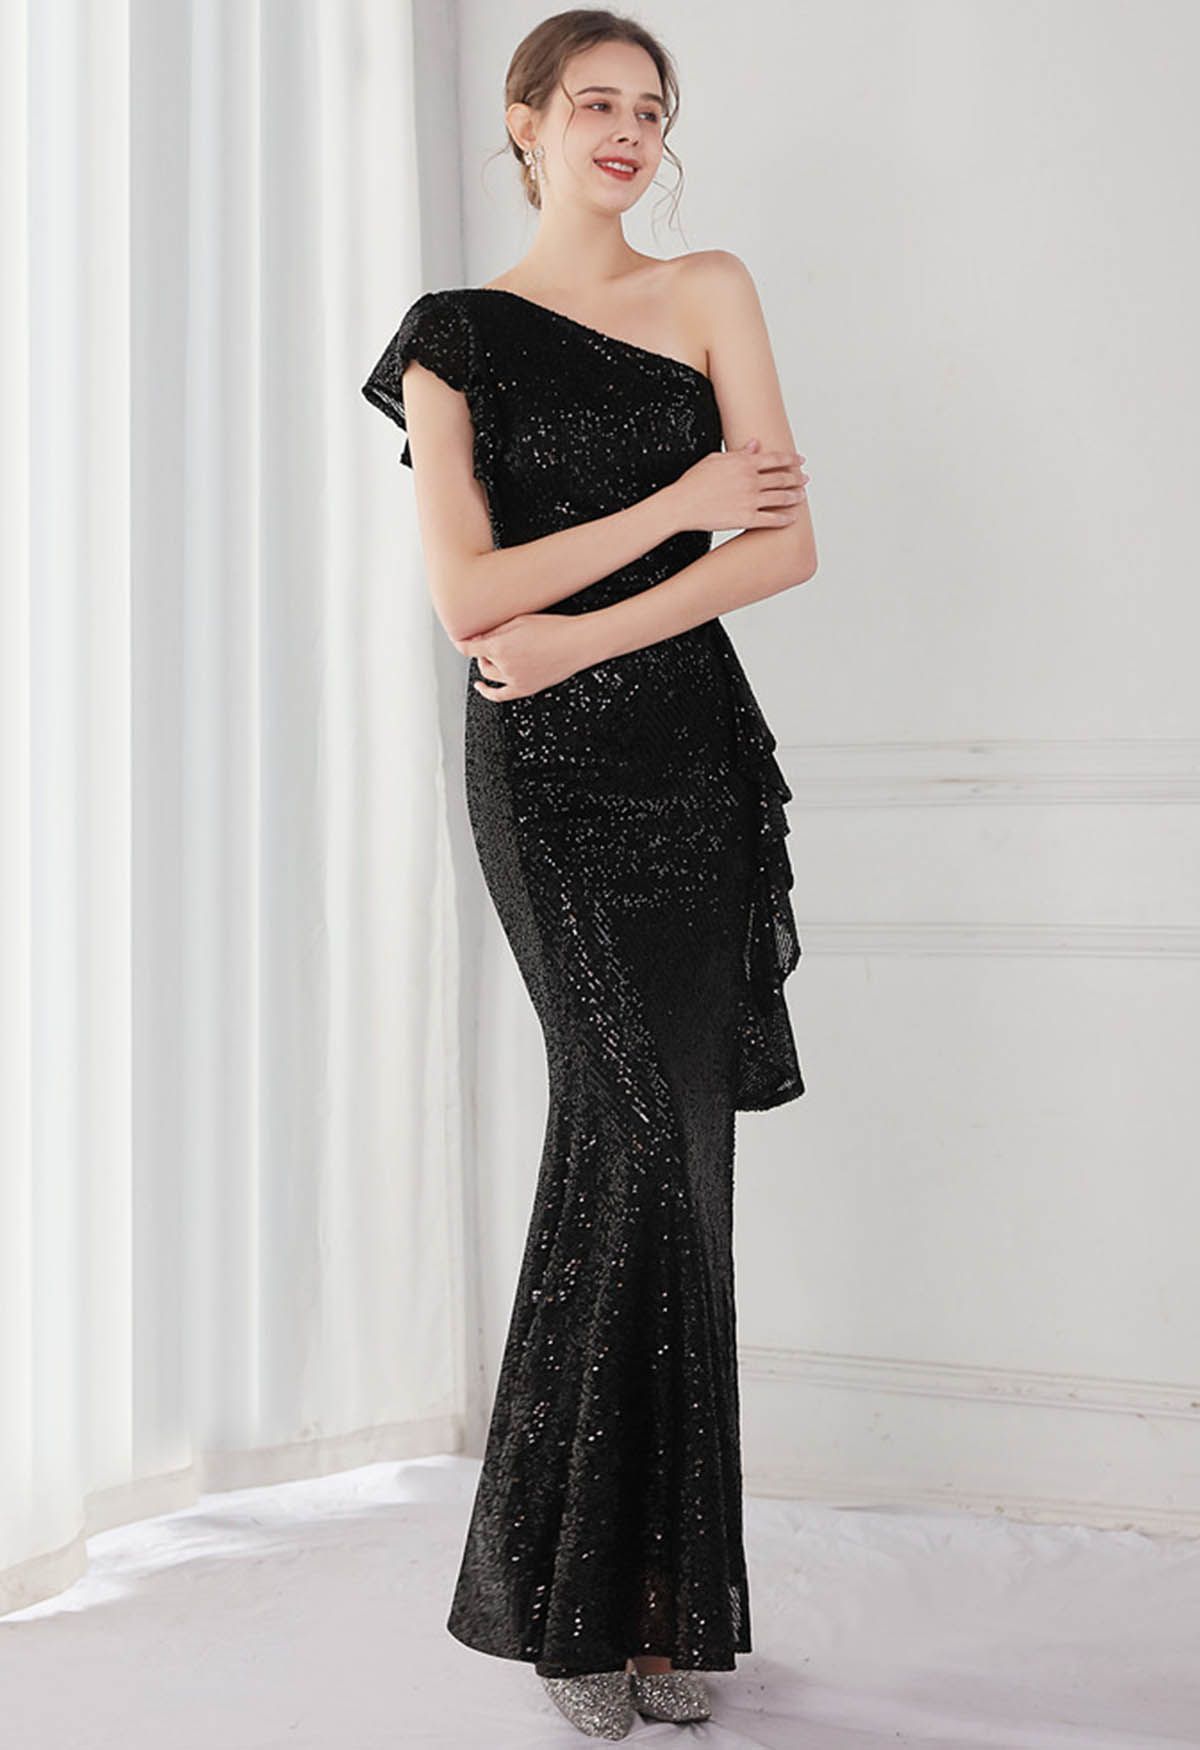 Sequined One-Shoulder Ruffle Mermaid Gown in Black - Retro, Indie and ...